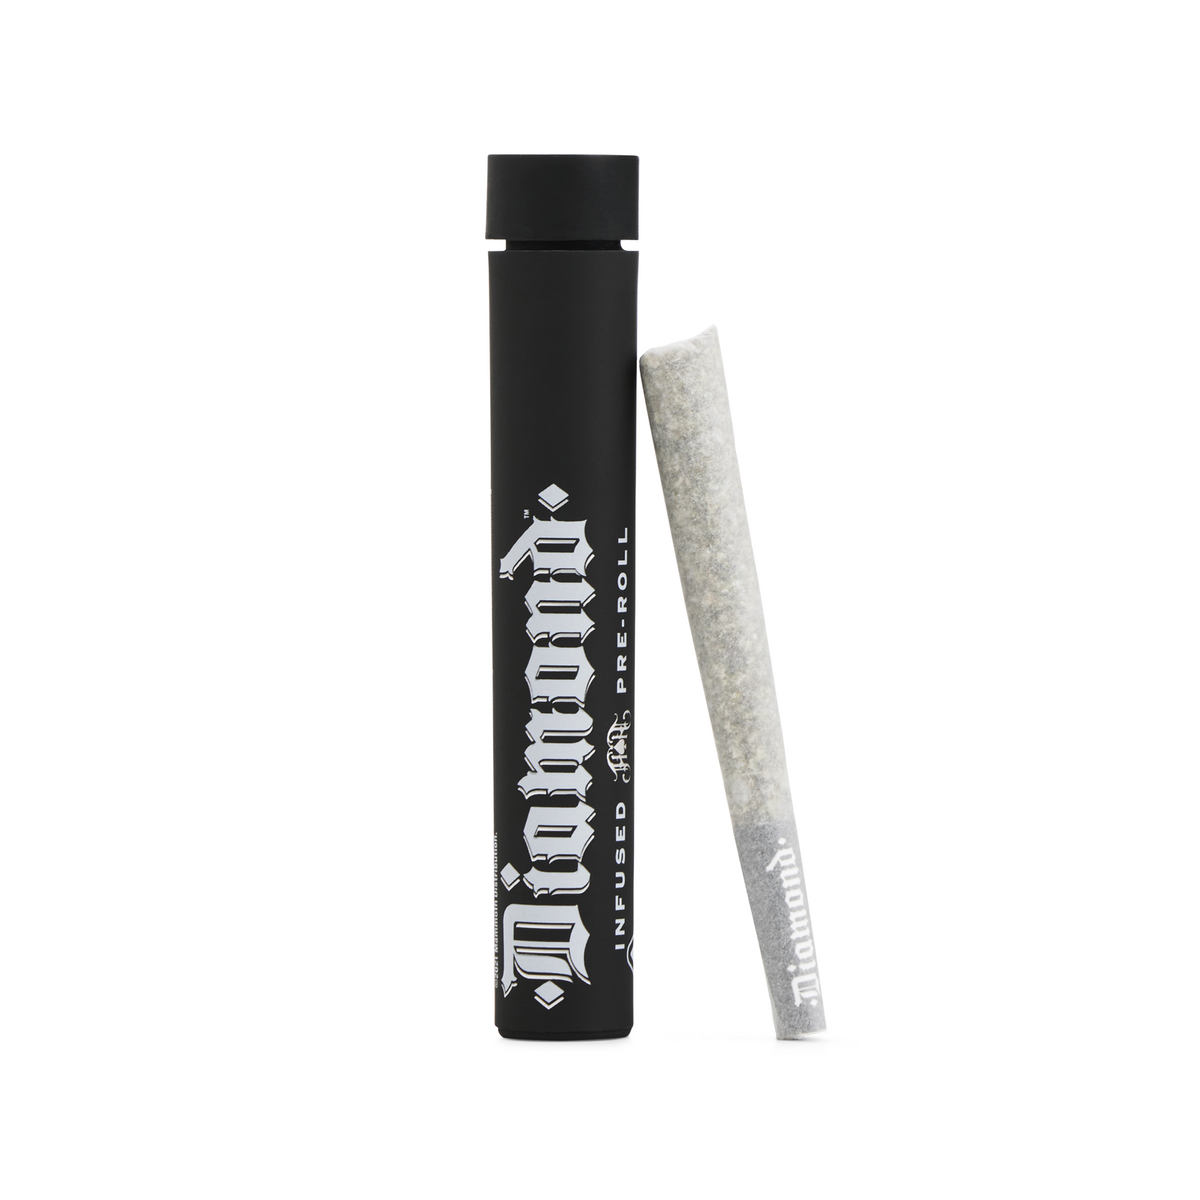 Zoap | Indica - Diamond THCA-Infused Pre-Roll - 1G Joint